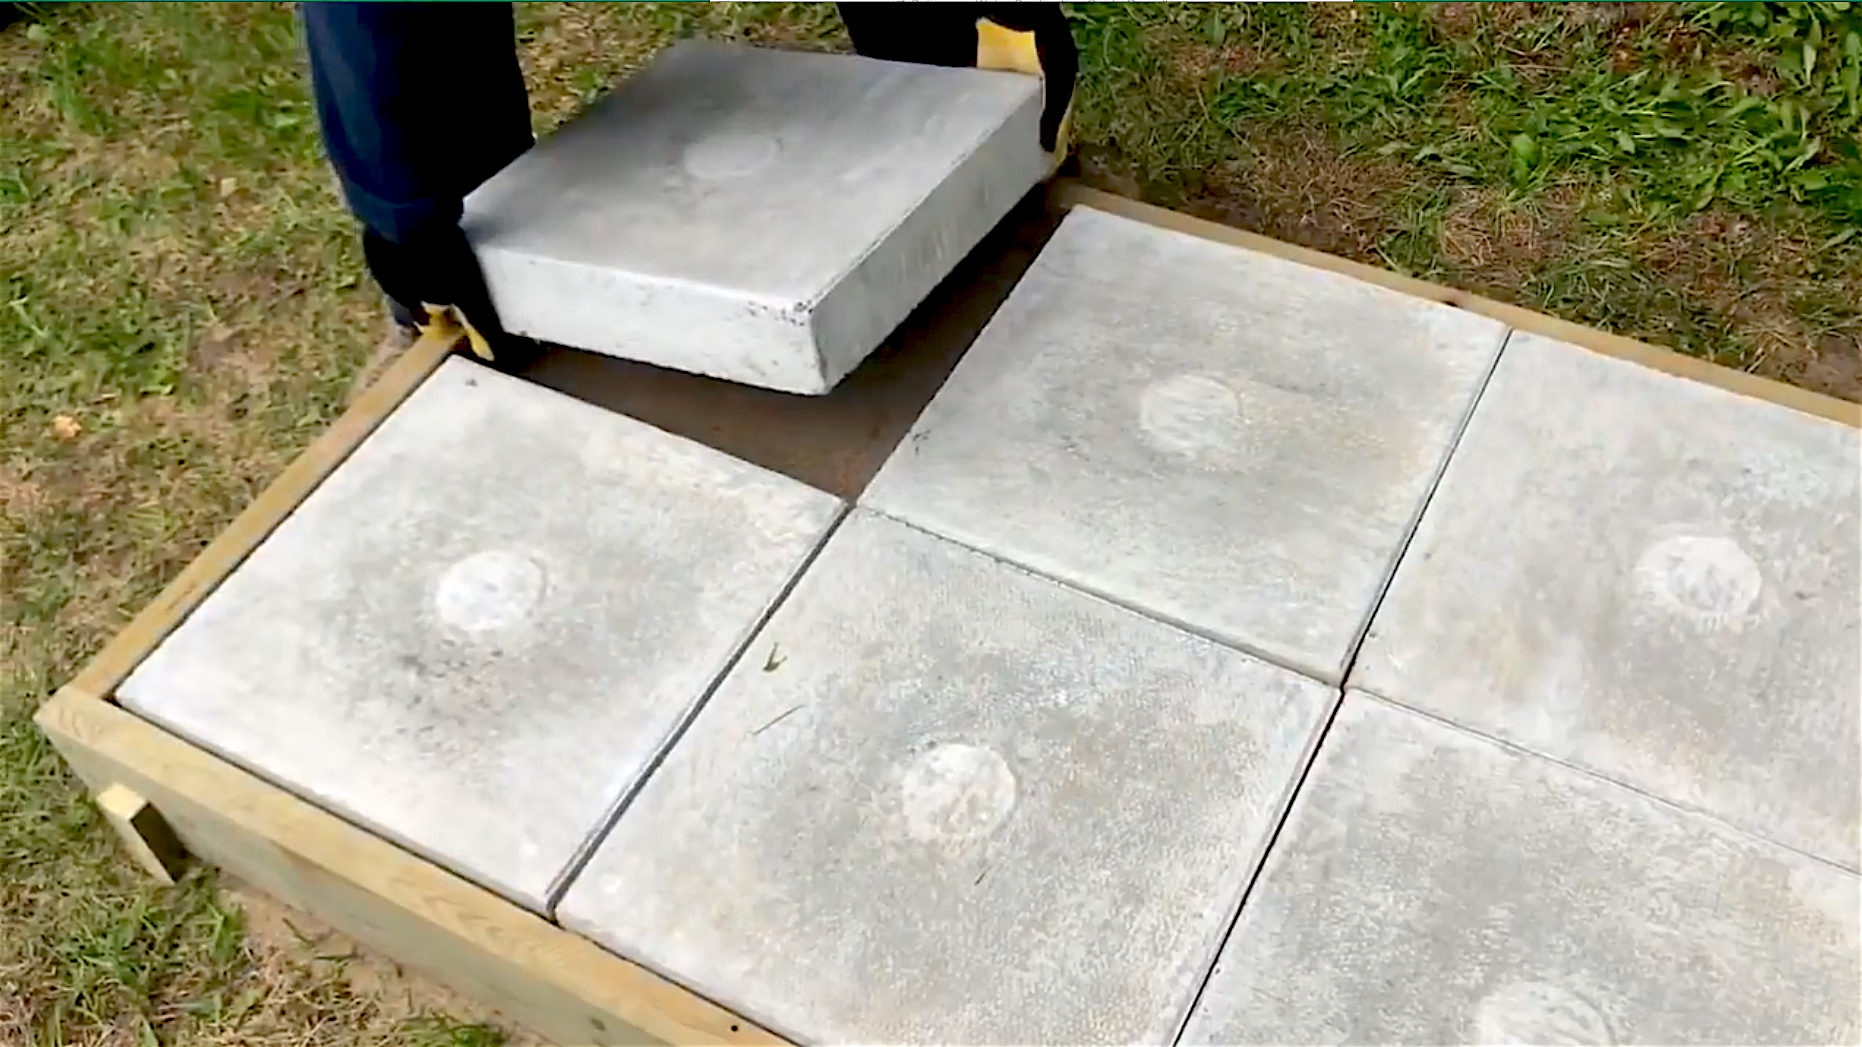 CONCRETE FOUNDATION PAD: Build One Without Pouring ...